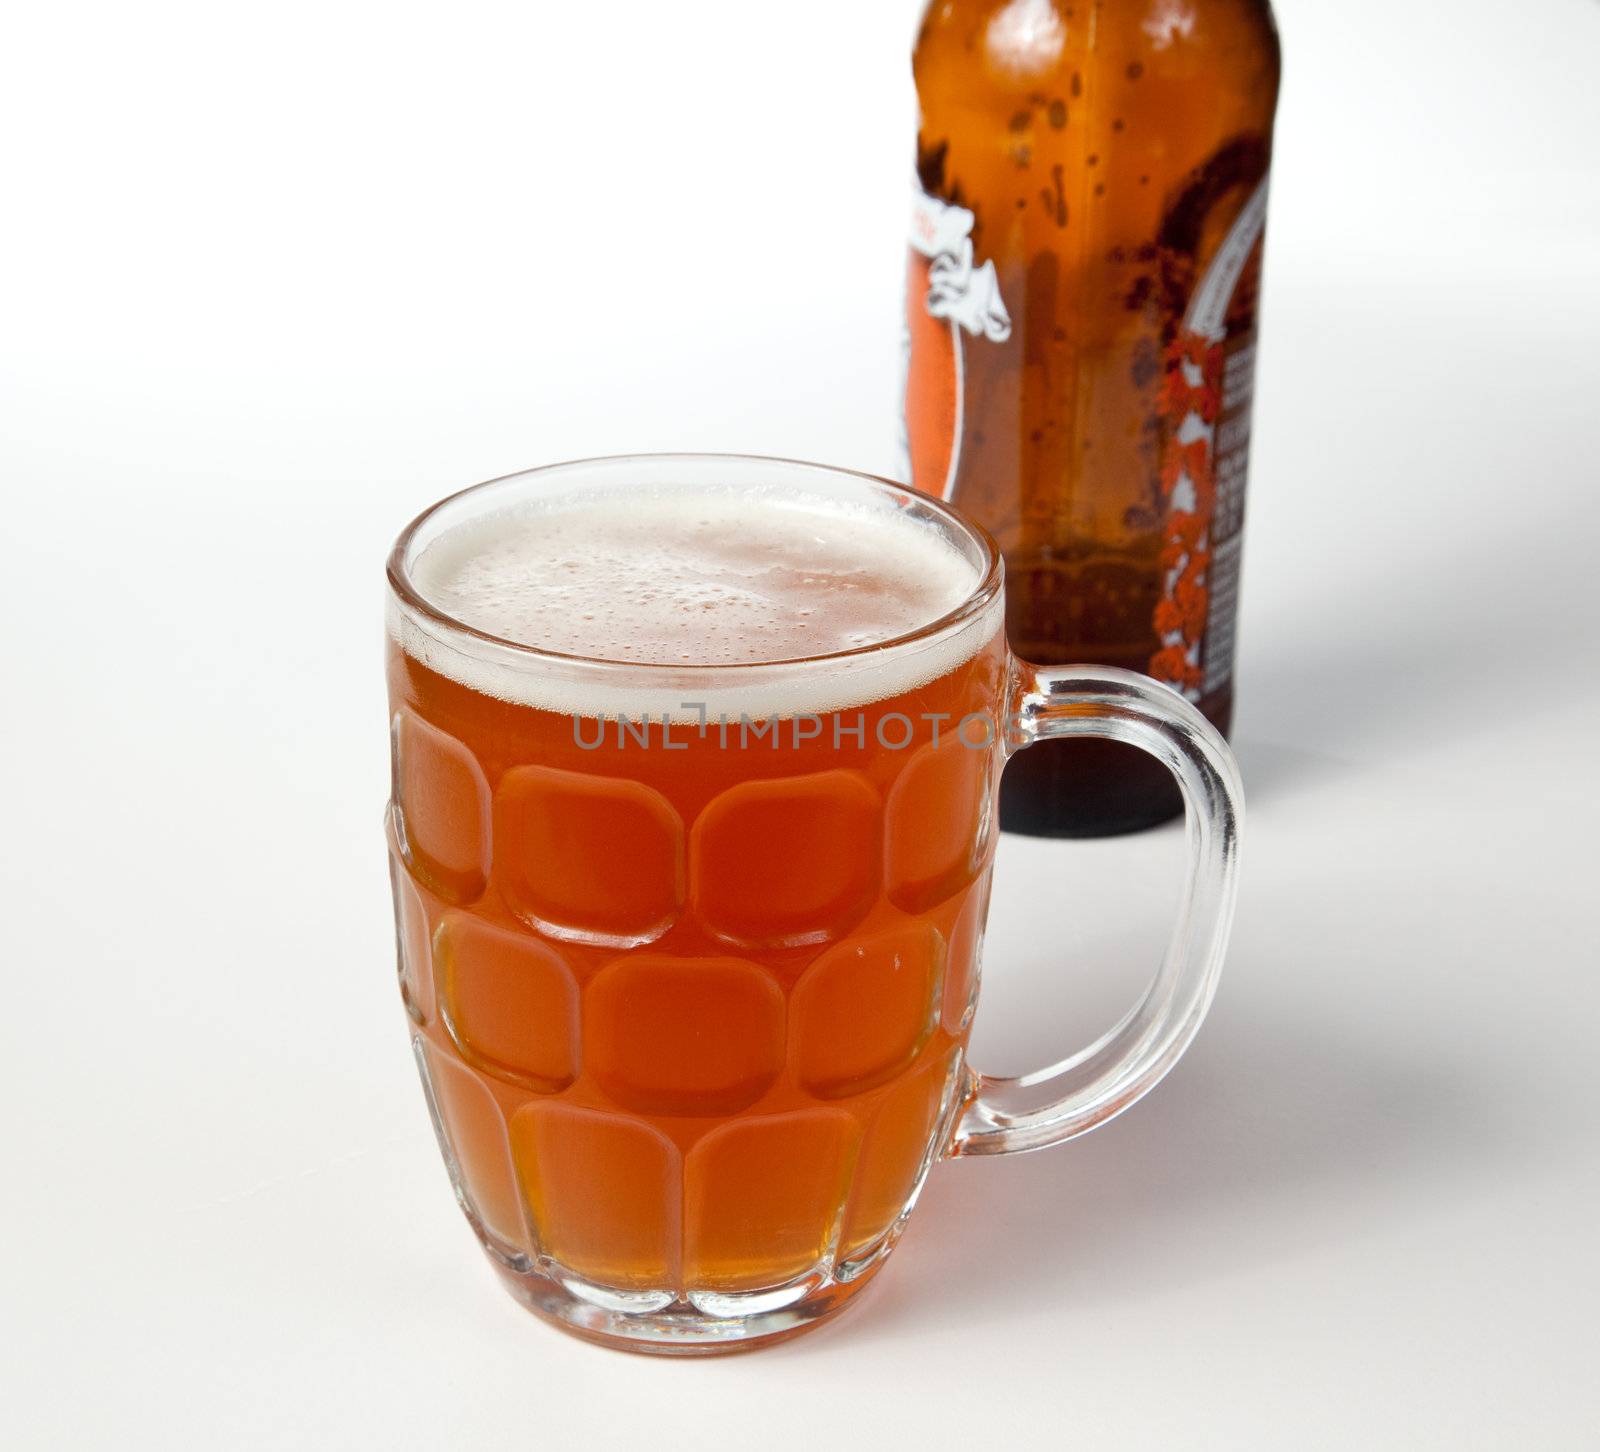 Golden brown beer in an English style pint mug with foamy head and bottle out of focus in background